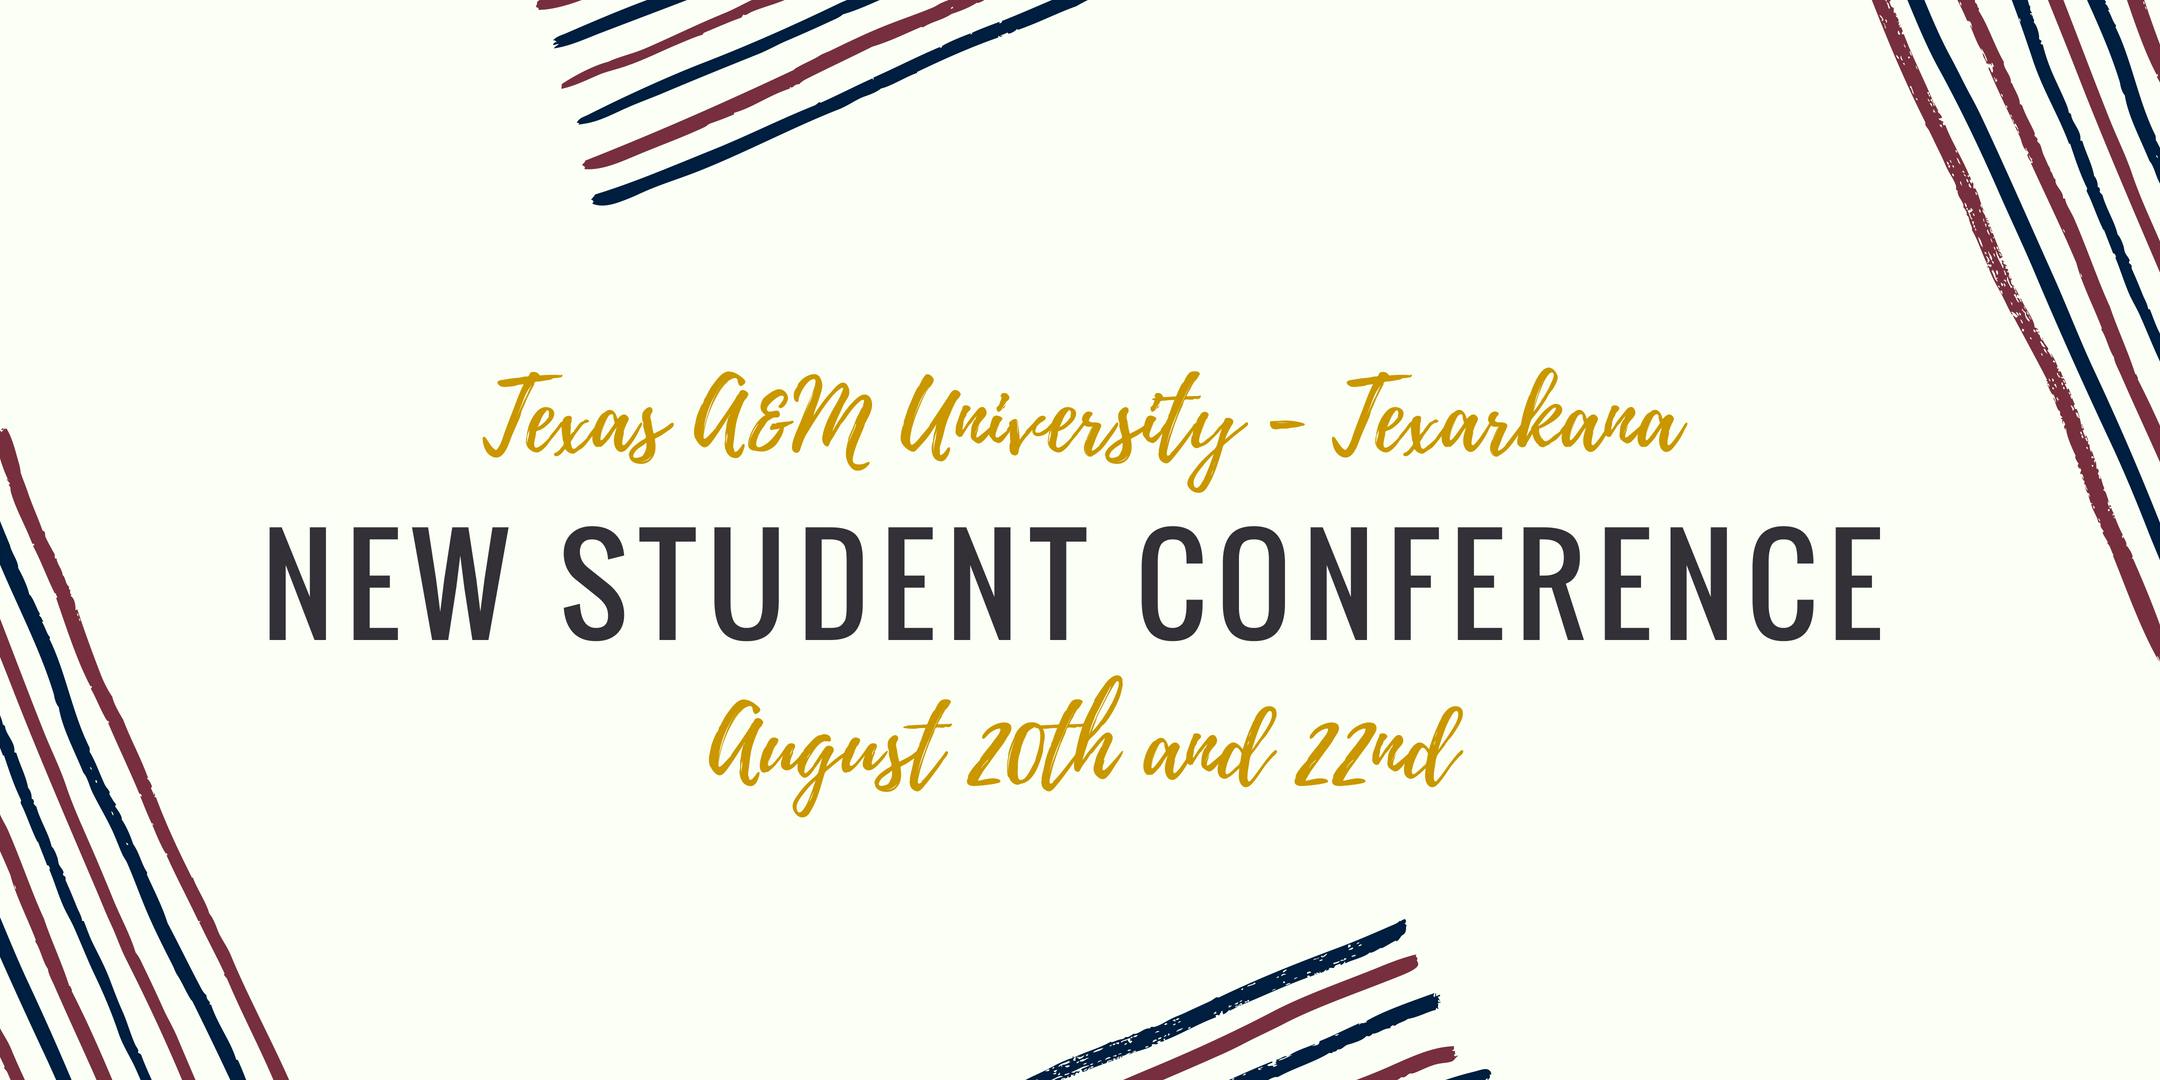 New Student Conference - August 20th